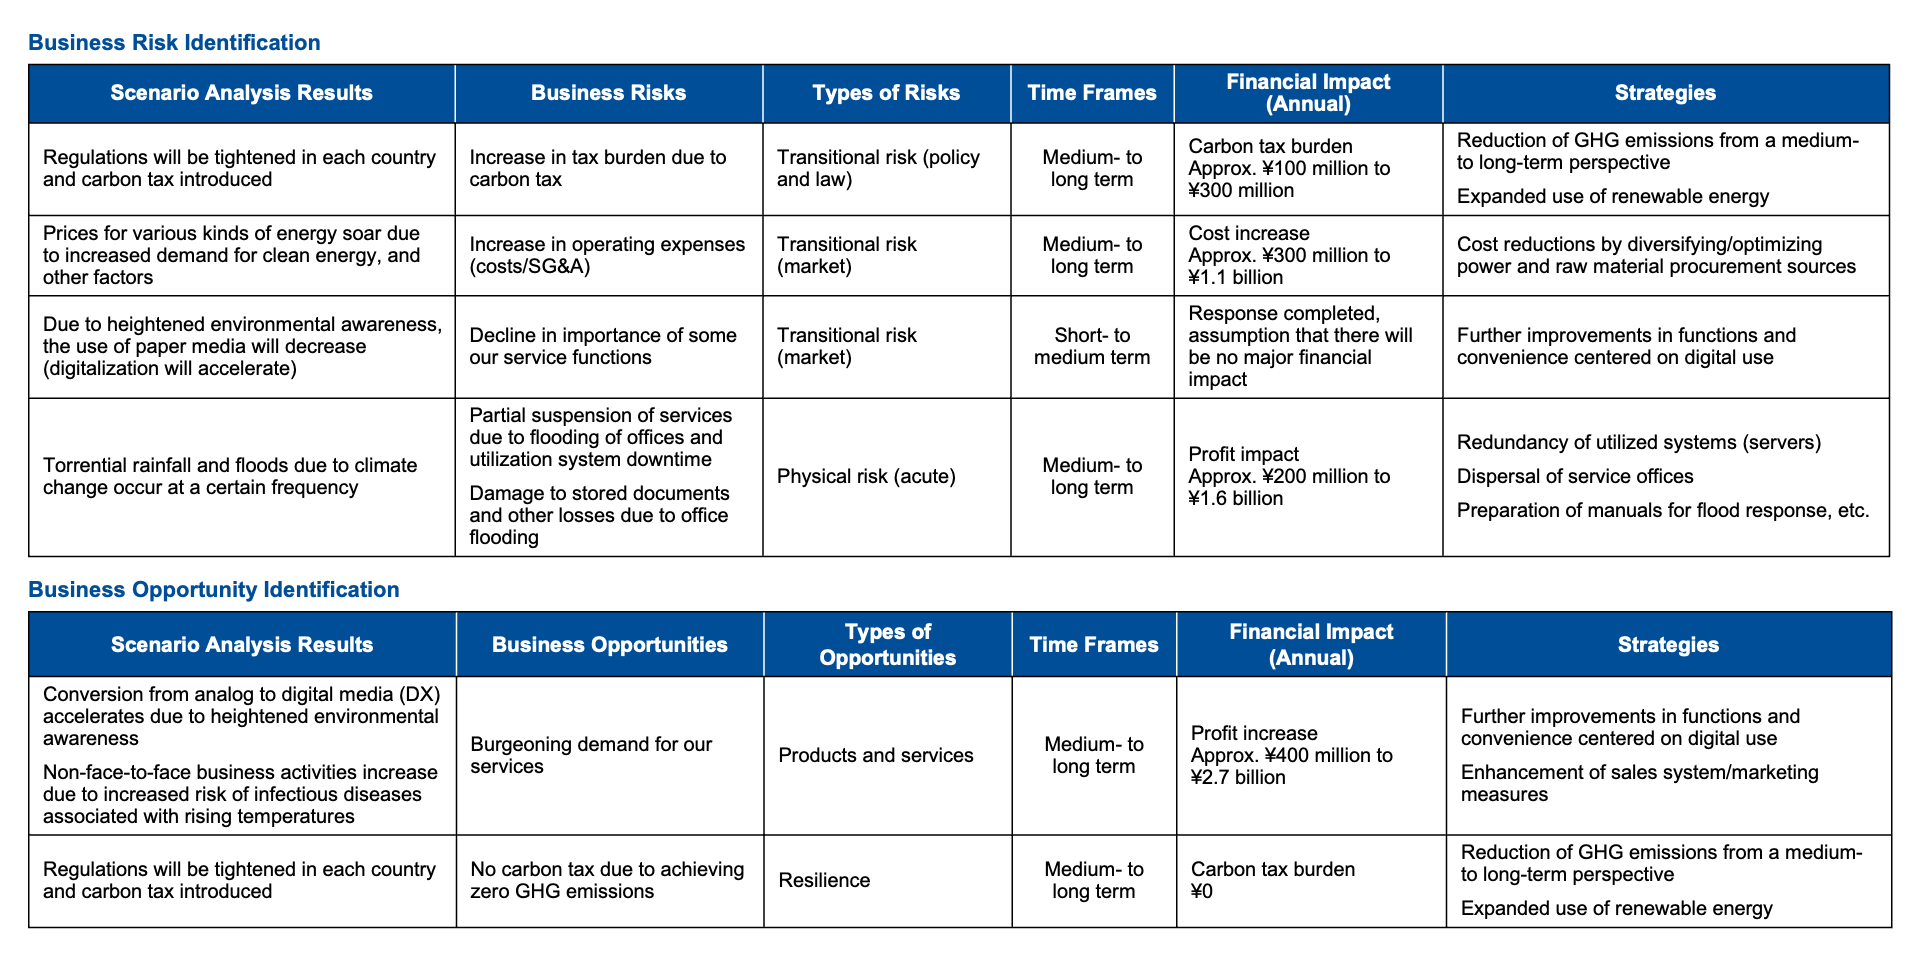 Scenario Analysis (Business Risks and Opportunities)